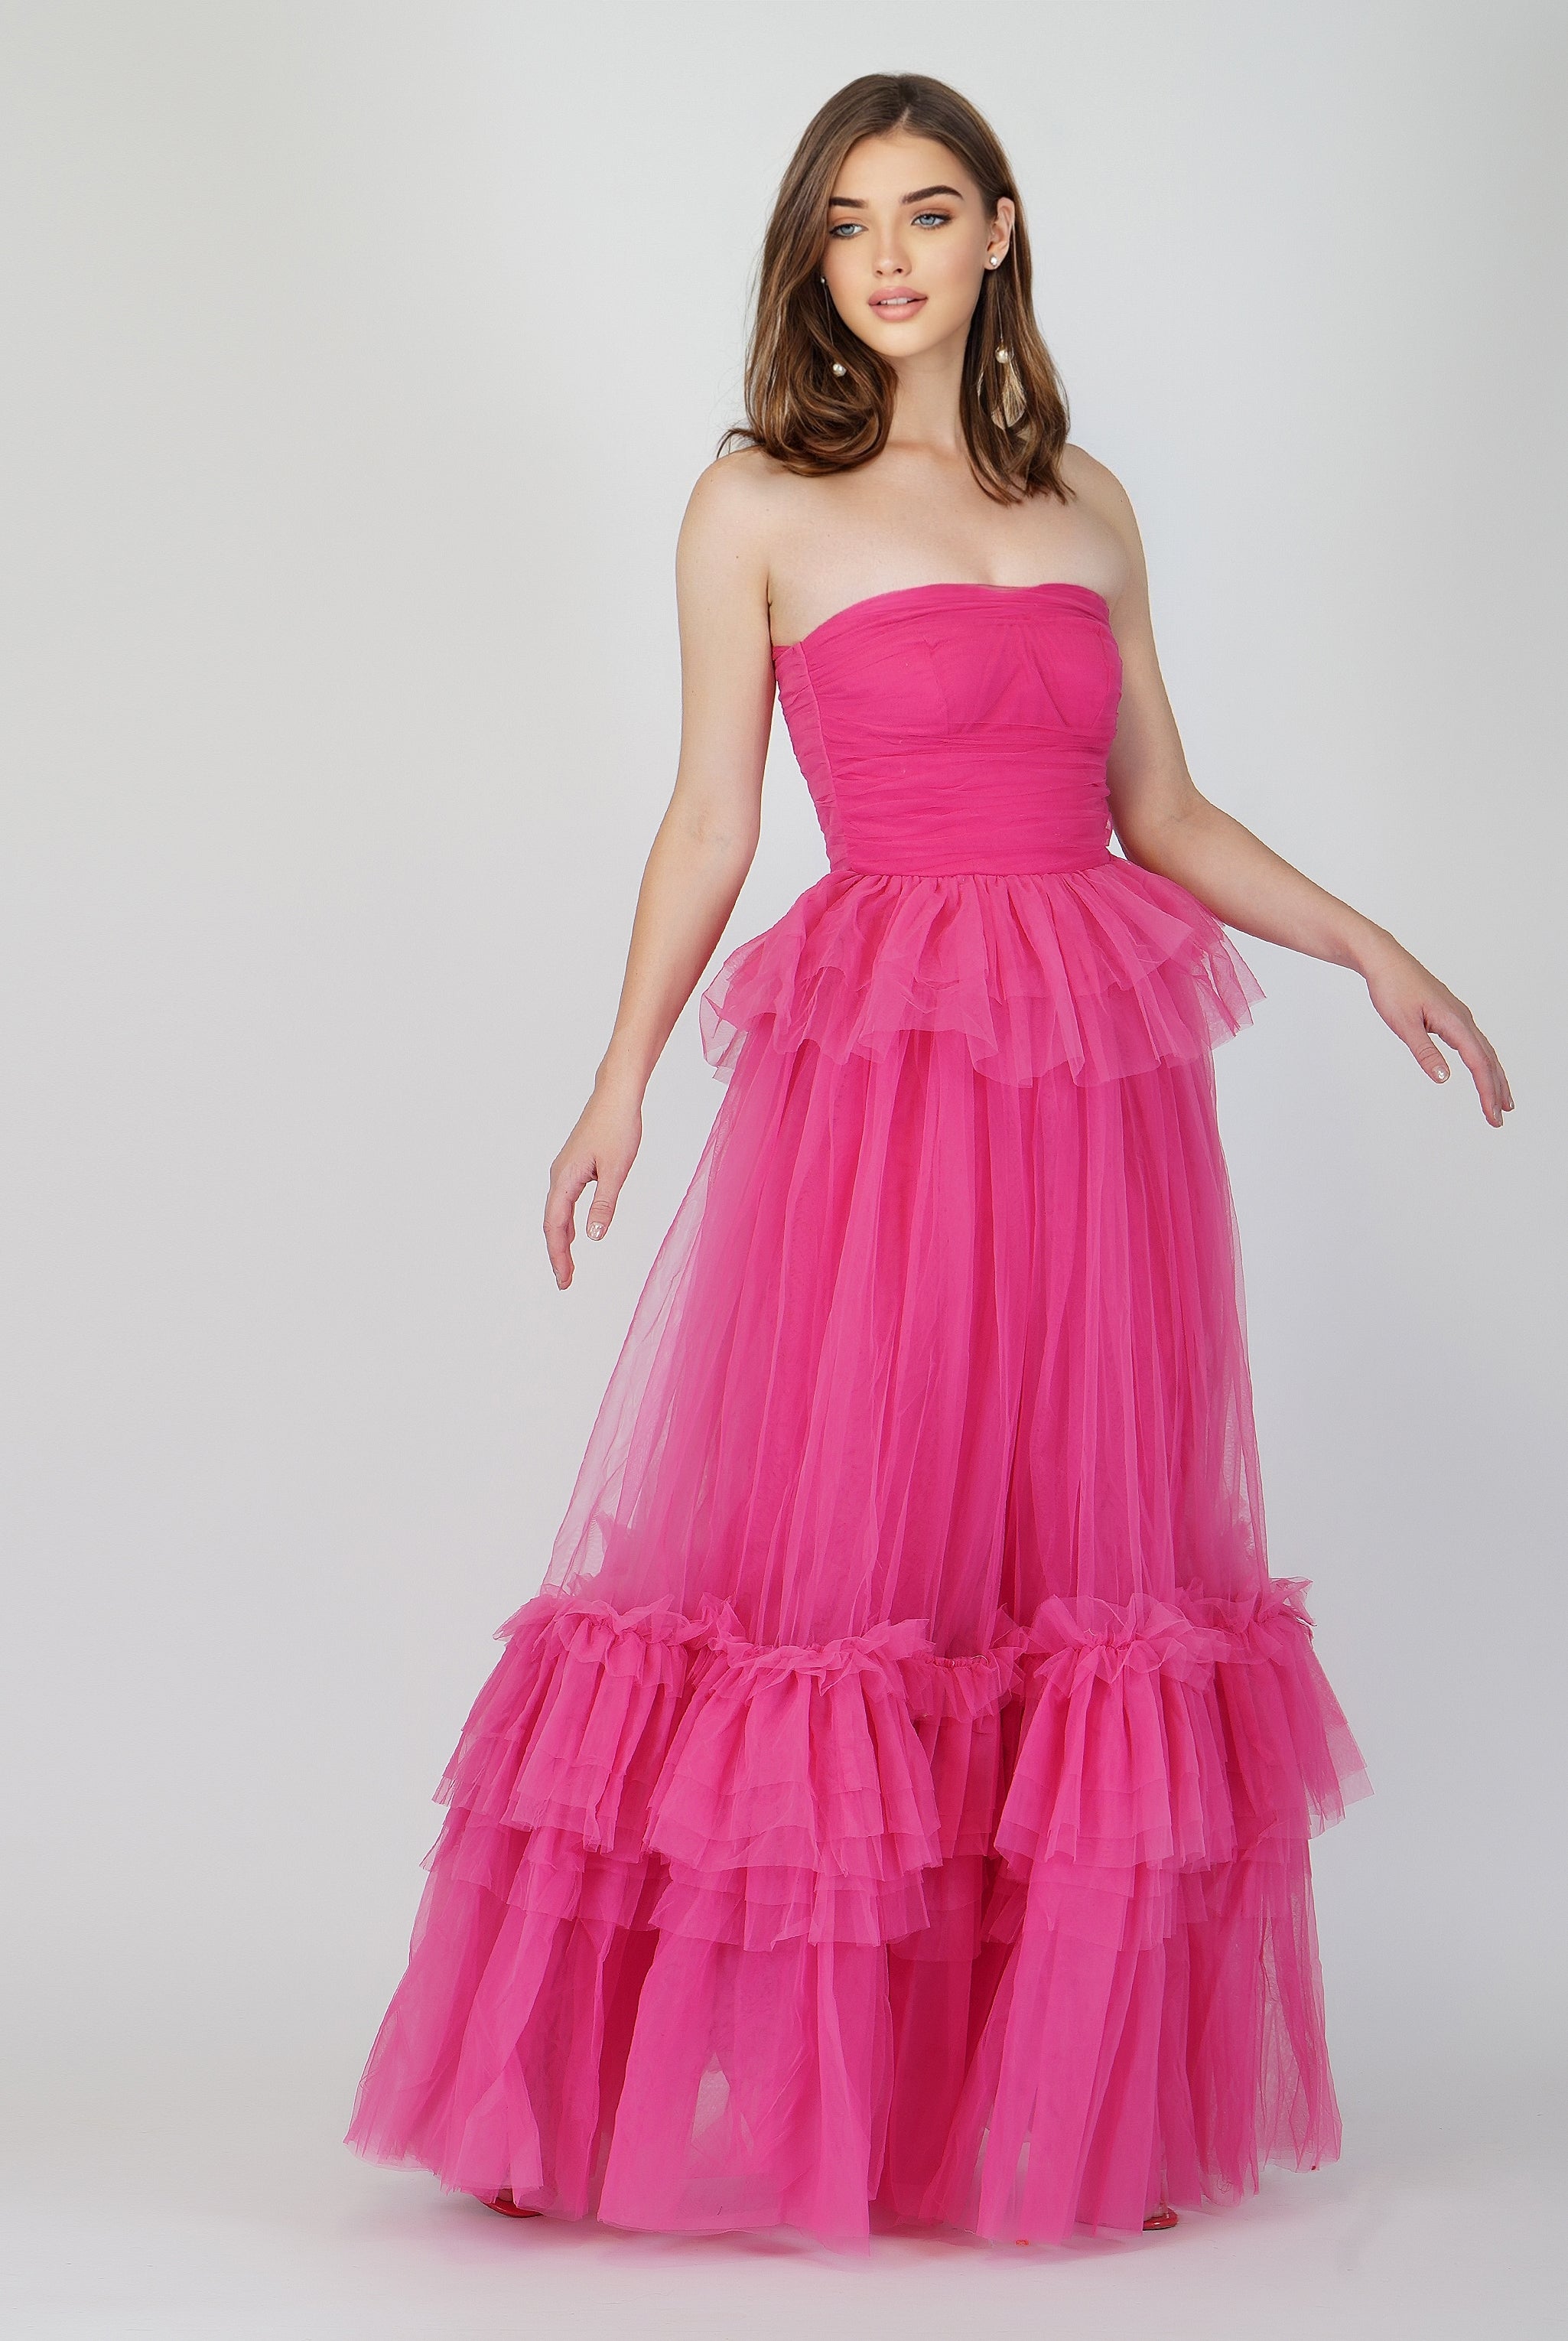 Ana Pink Tulle Dress